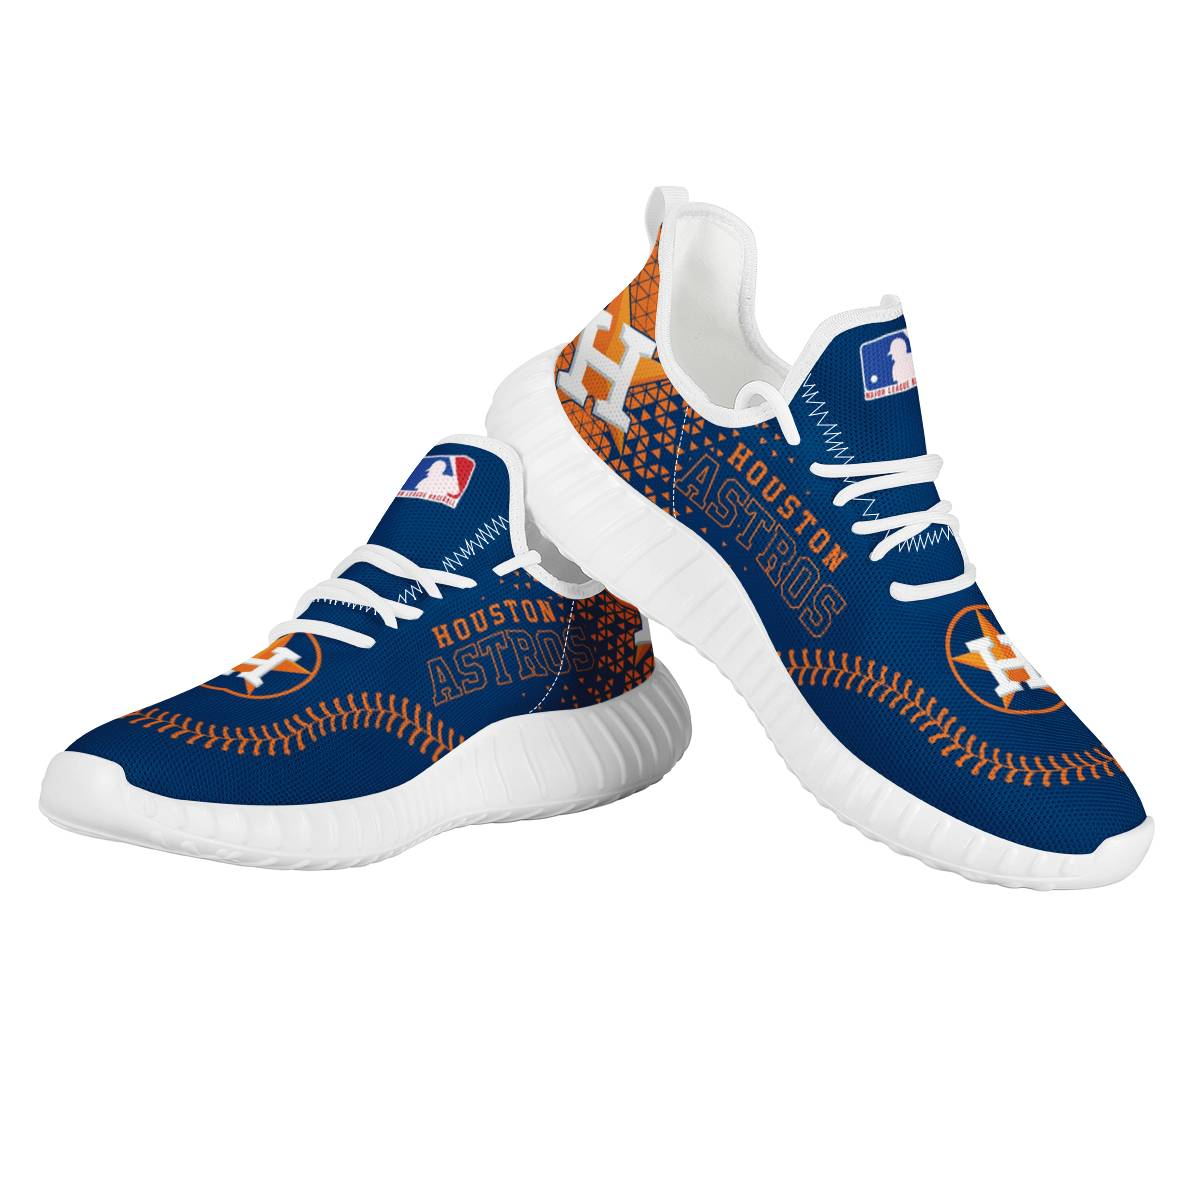 Women's MLB Houston Astros Mesh Knit Sneakers/Shoes 004